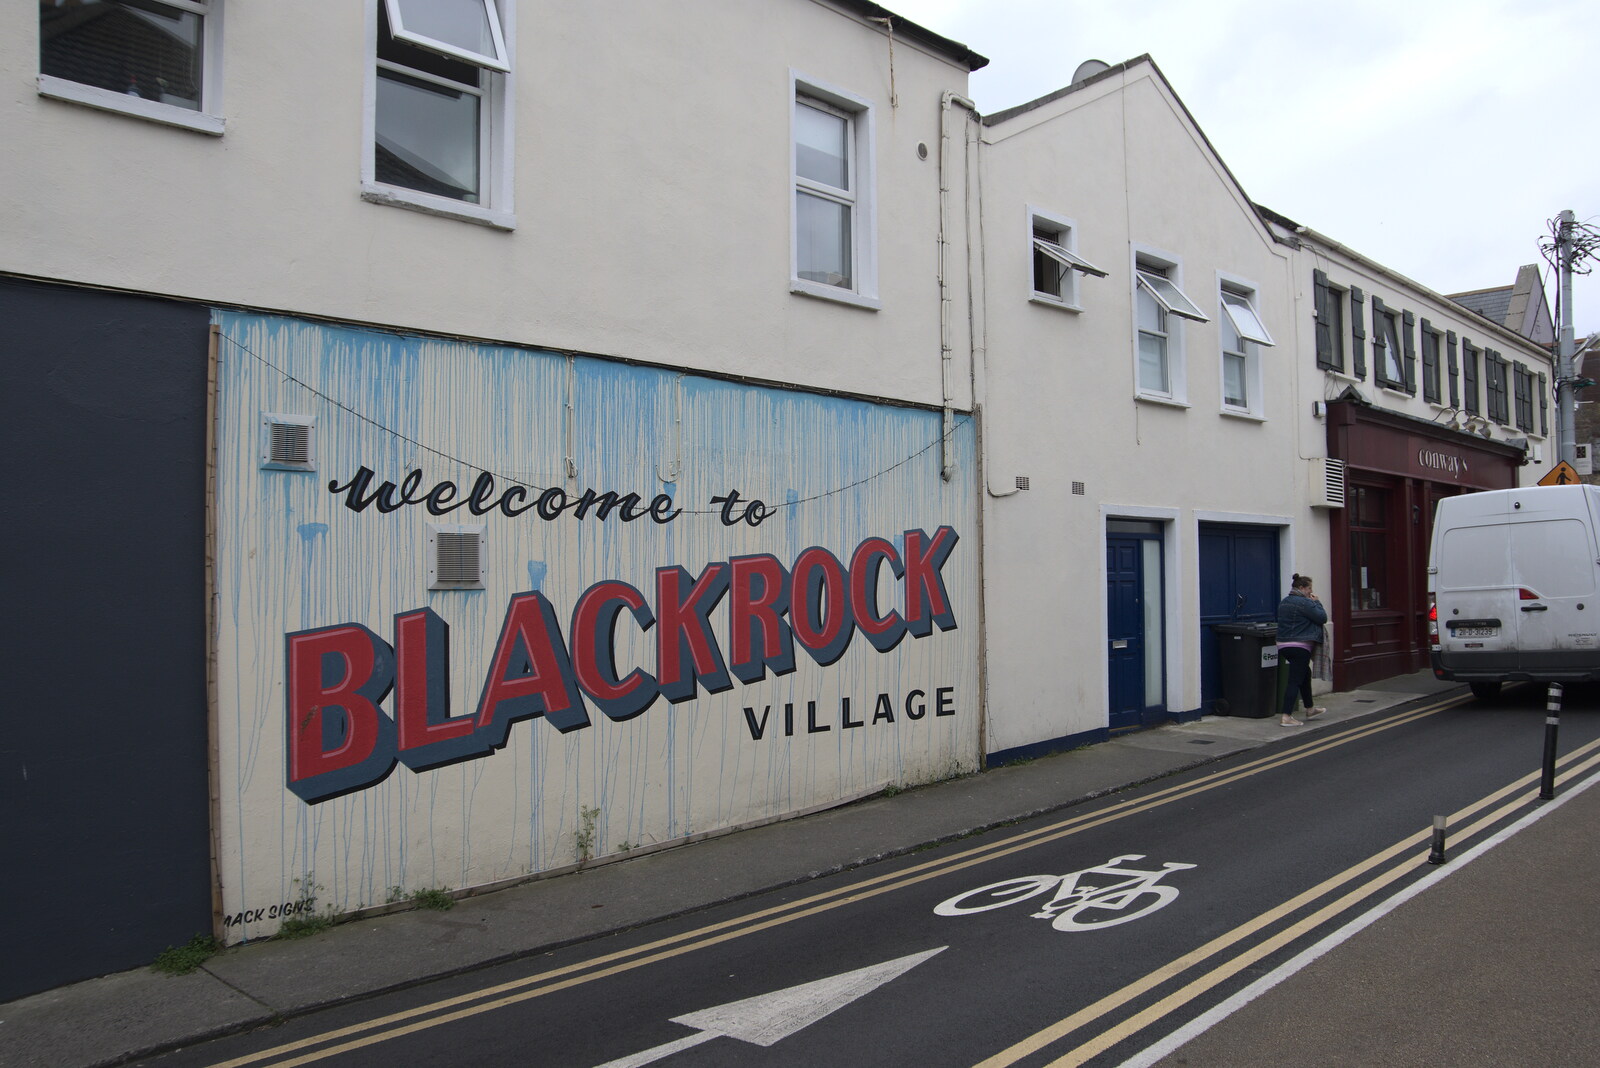 Blackrock North and South, Louth and County Dublin, Ireland - 23rd April 2022: Another urban 'village'